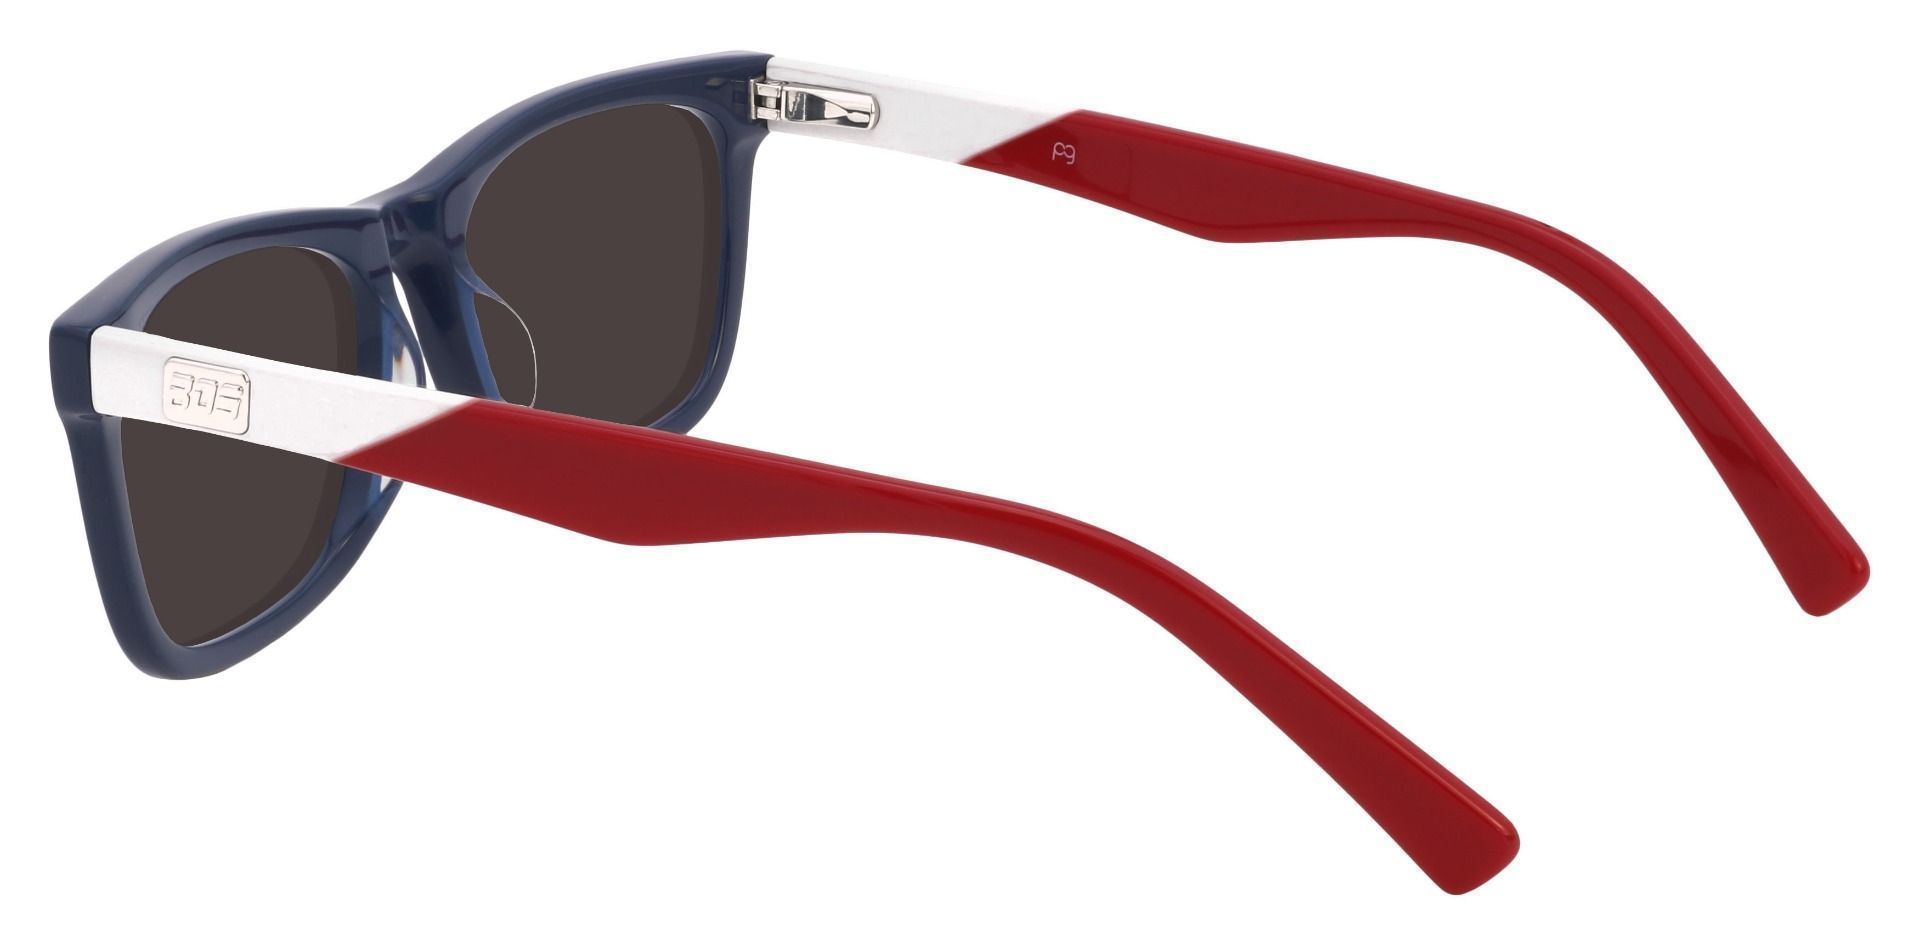 Quincy Rectangle Reading Sunglasses - Blue Frame With Gray Lenses